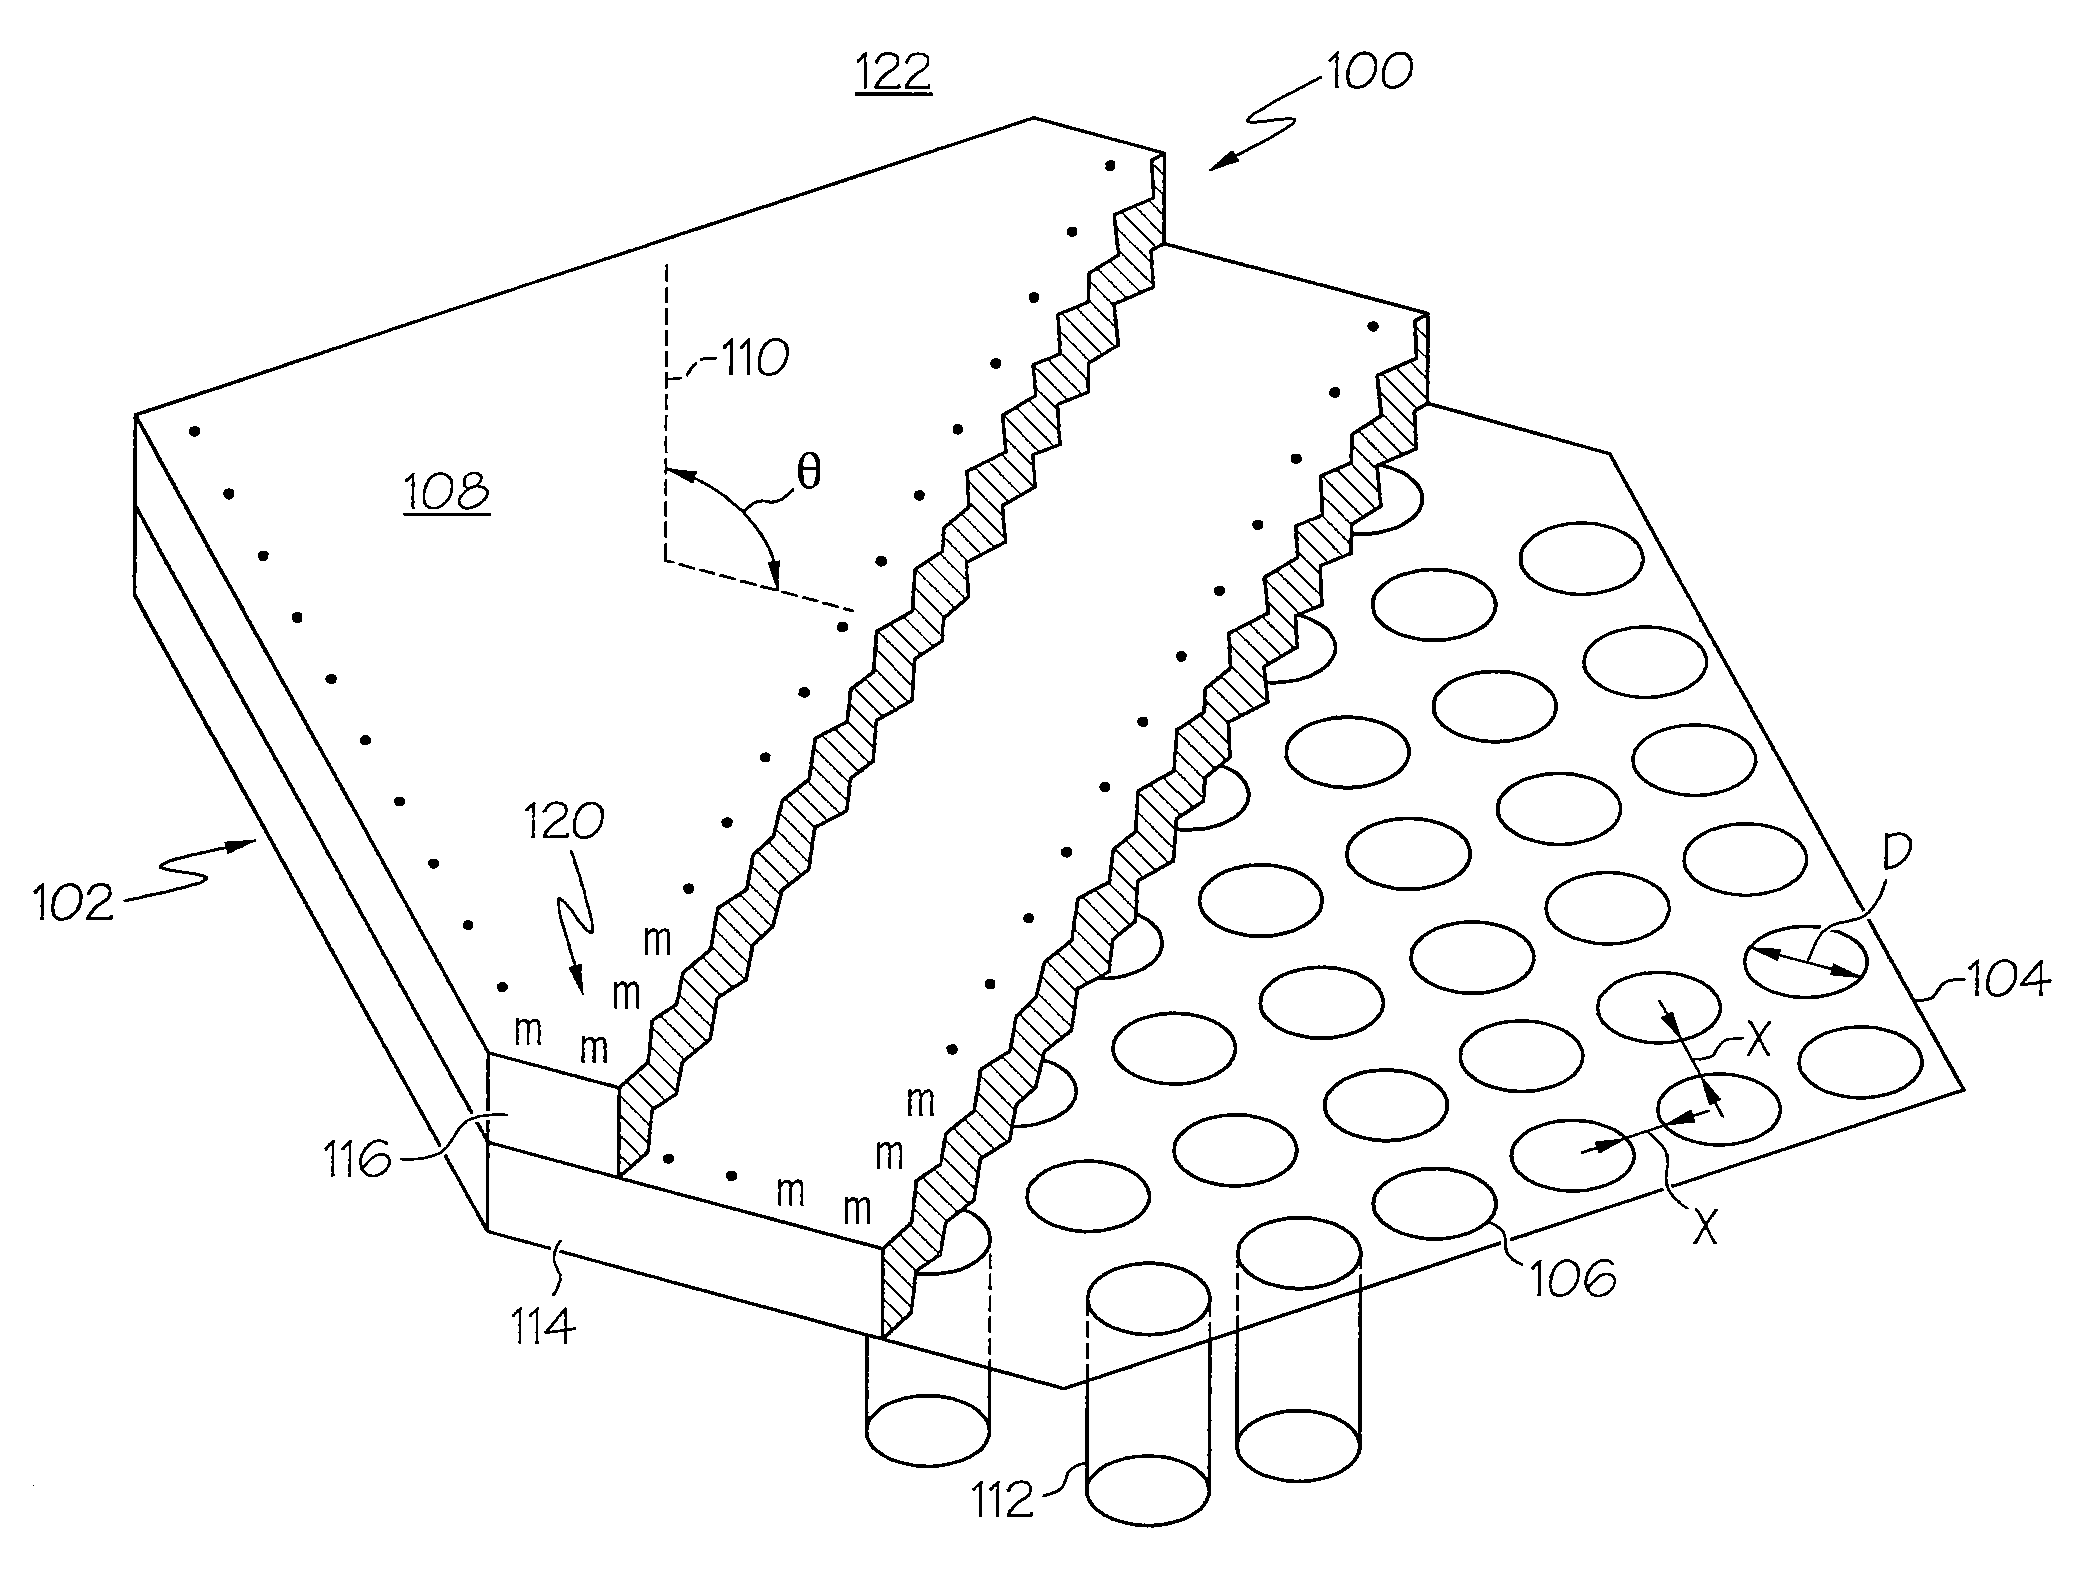 Wide Angle Impedance Matching Using Metamaterials in a Phased Array Antenna System